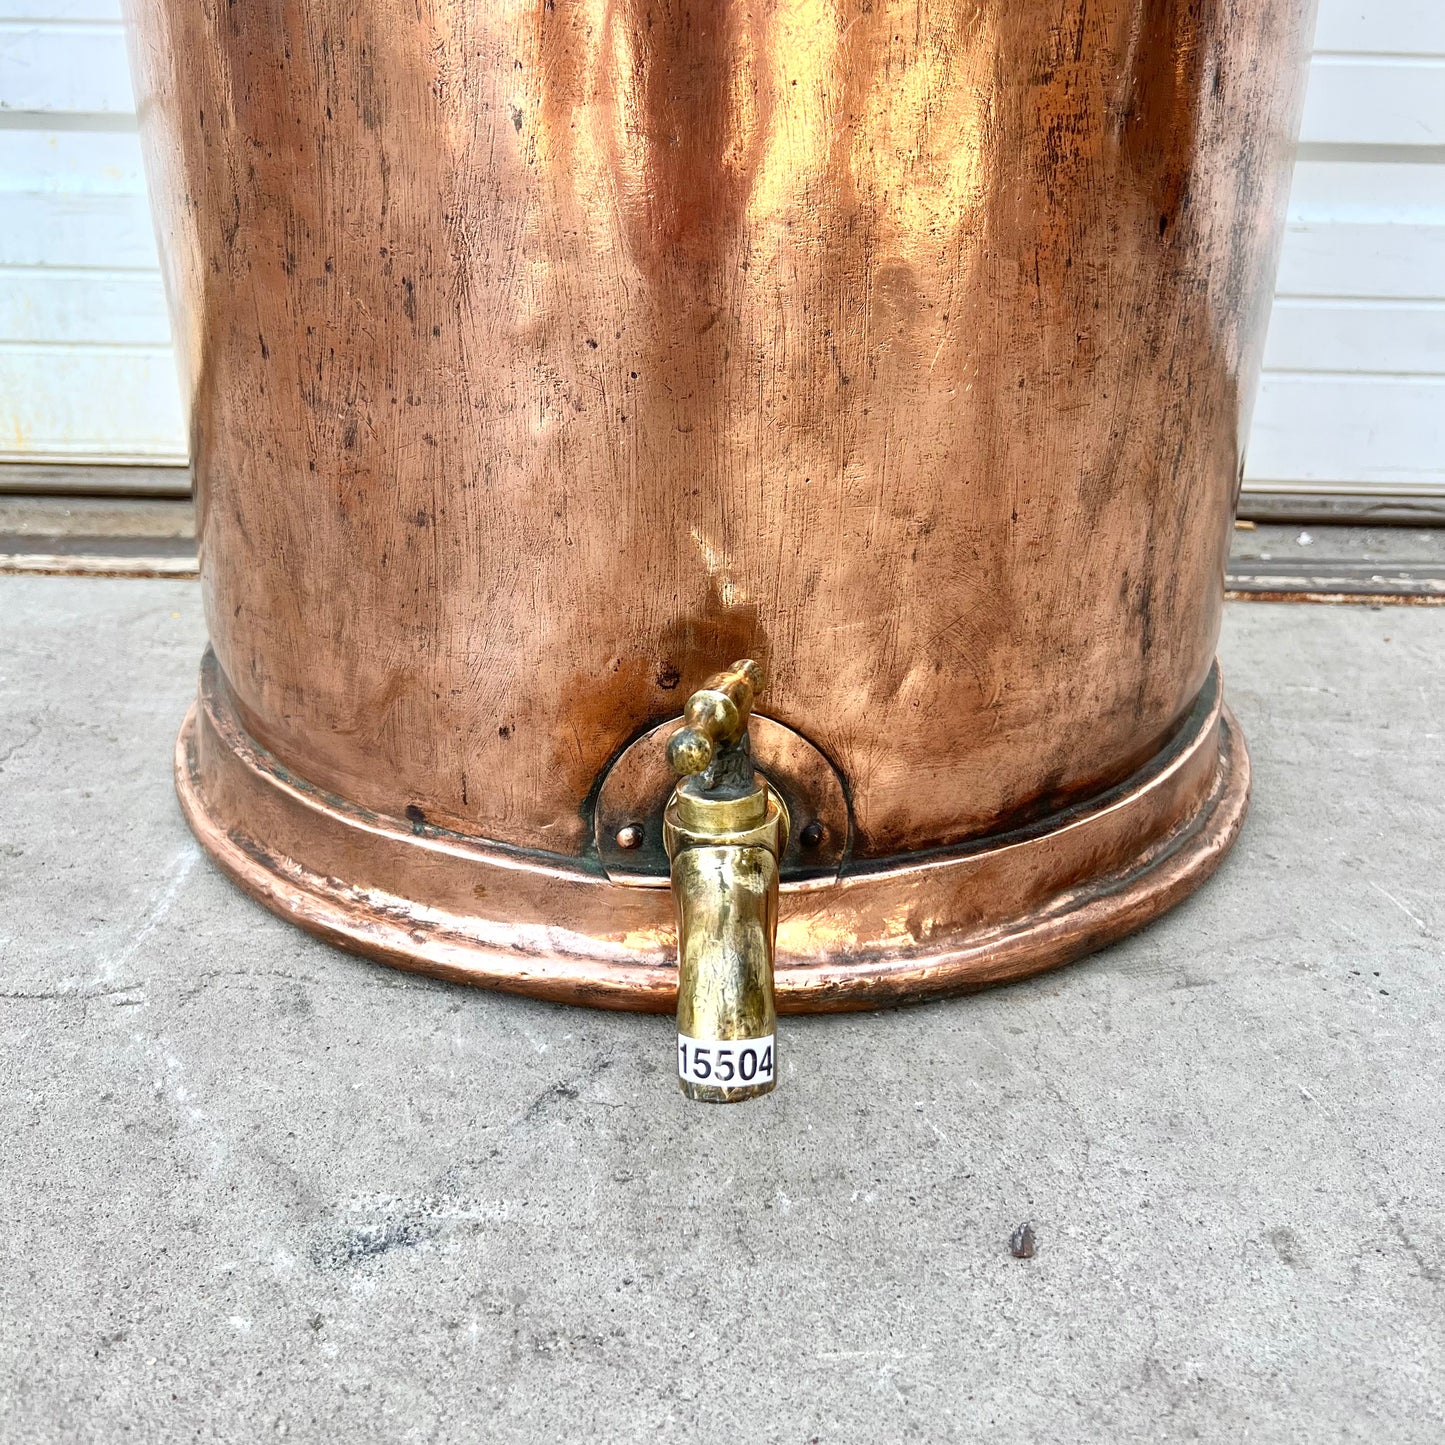 Very Large Copper Receptacle with Spigot